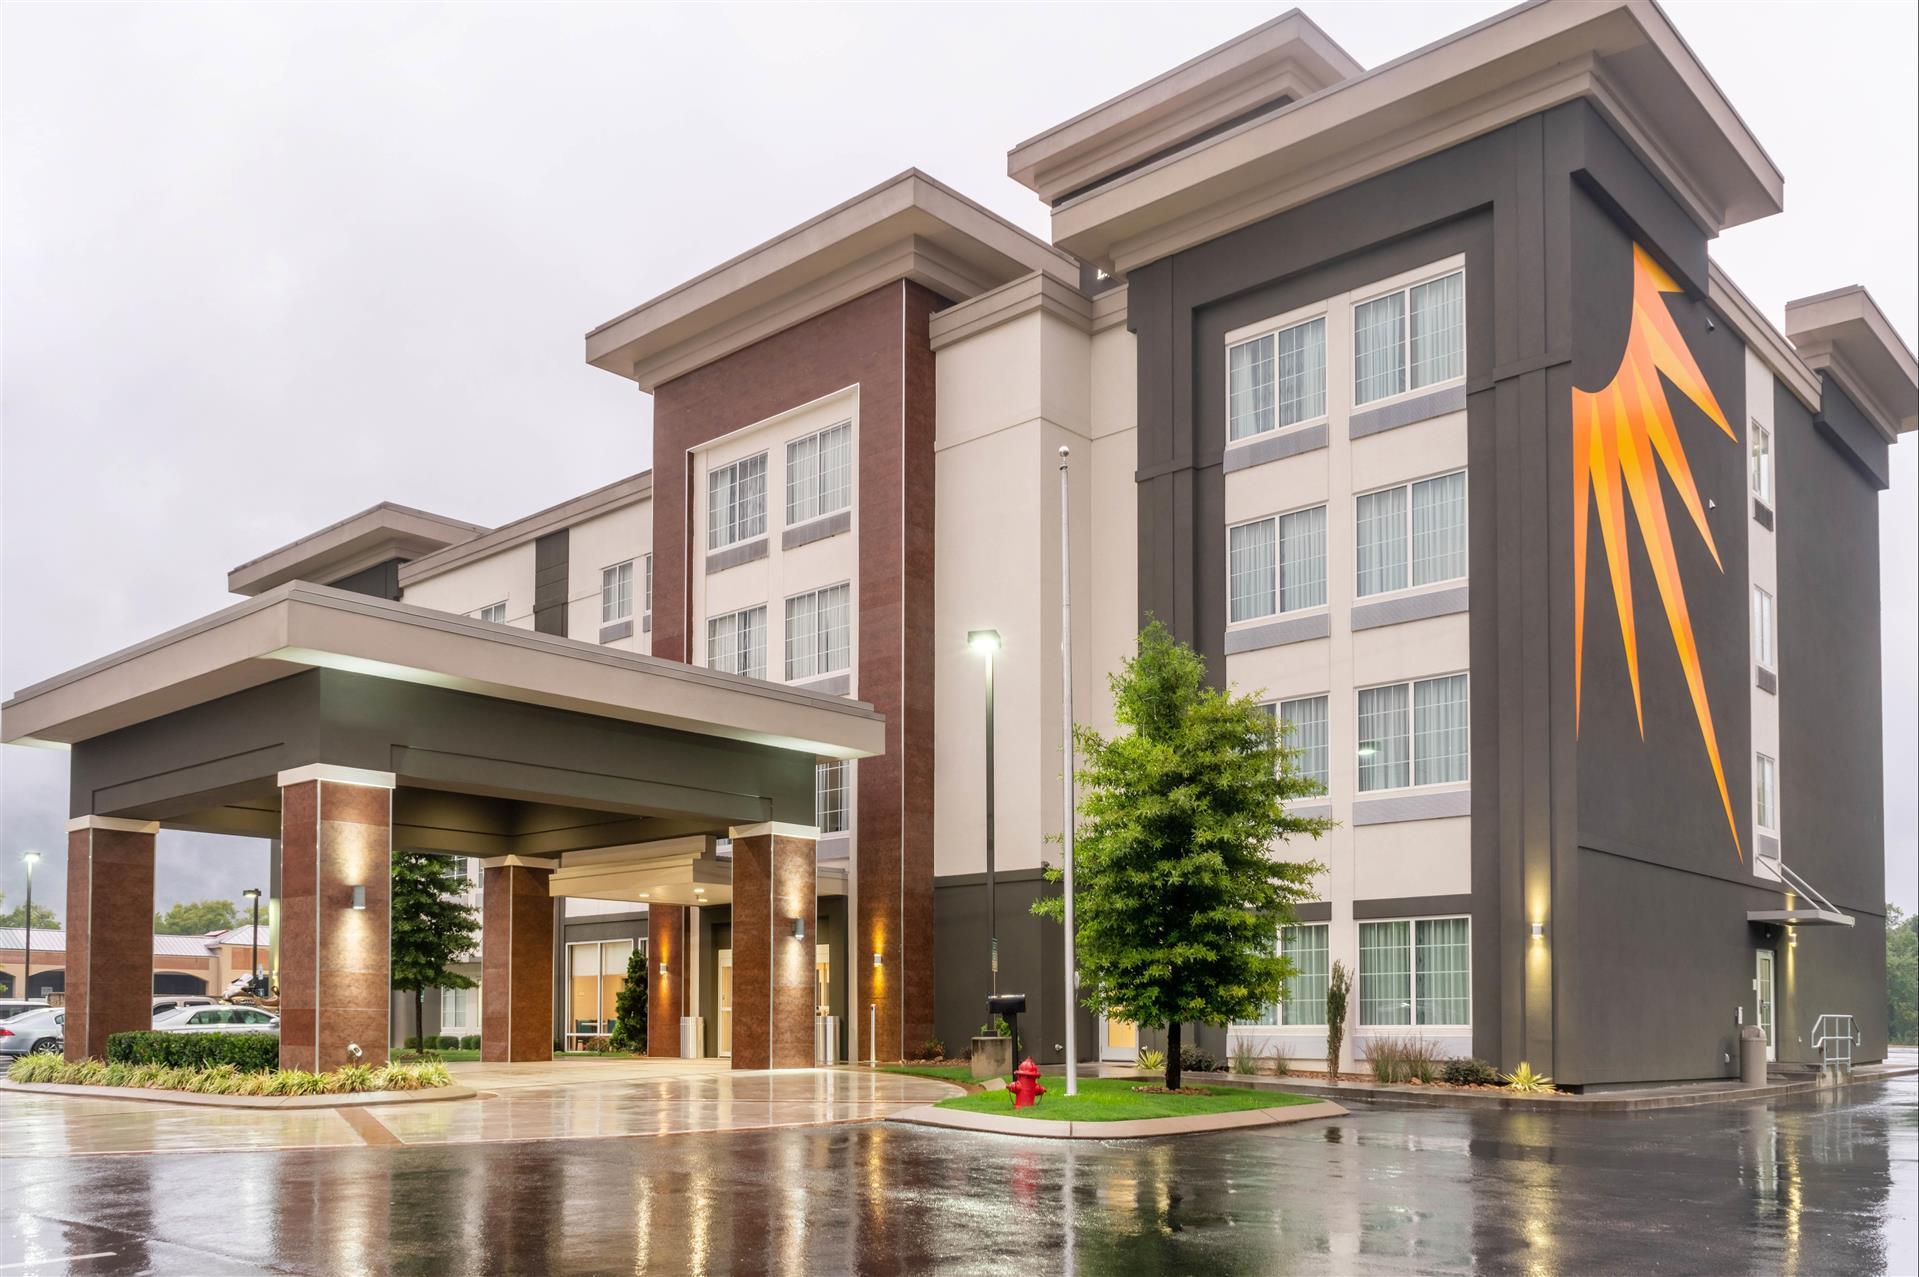 La Quinta Inn & Suites by Wyndham Chattanooga - Lookout Mtn in Chattanooga, TN